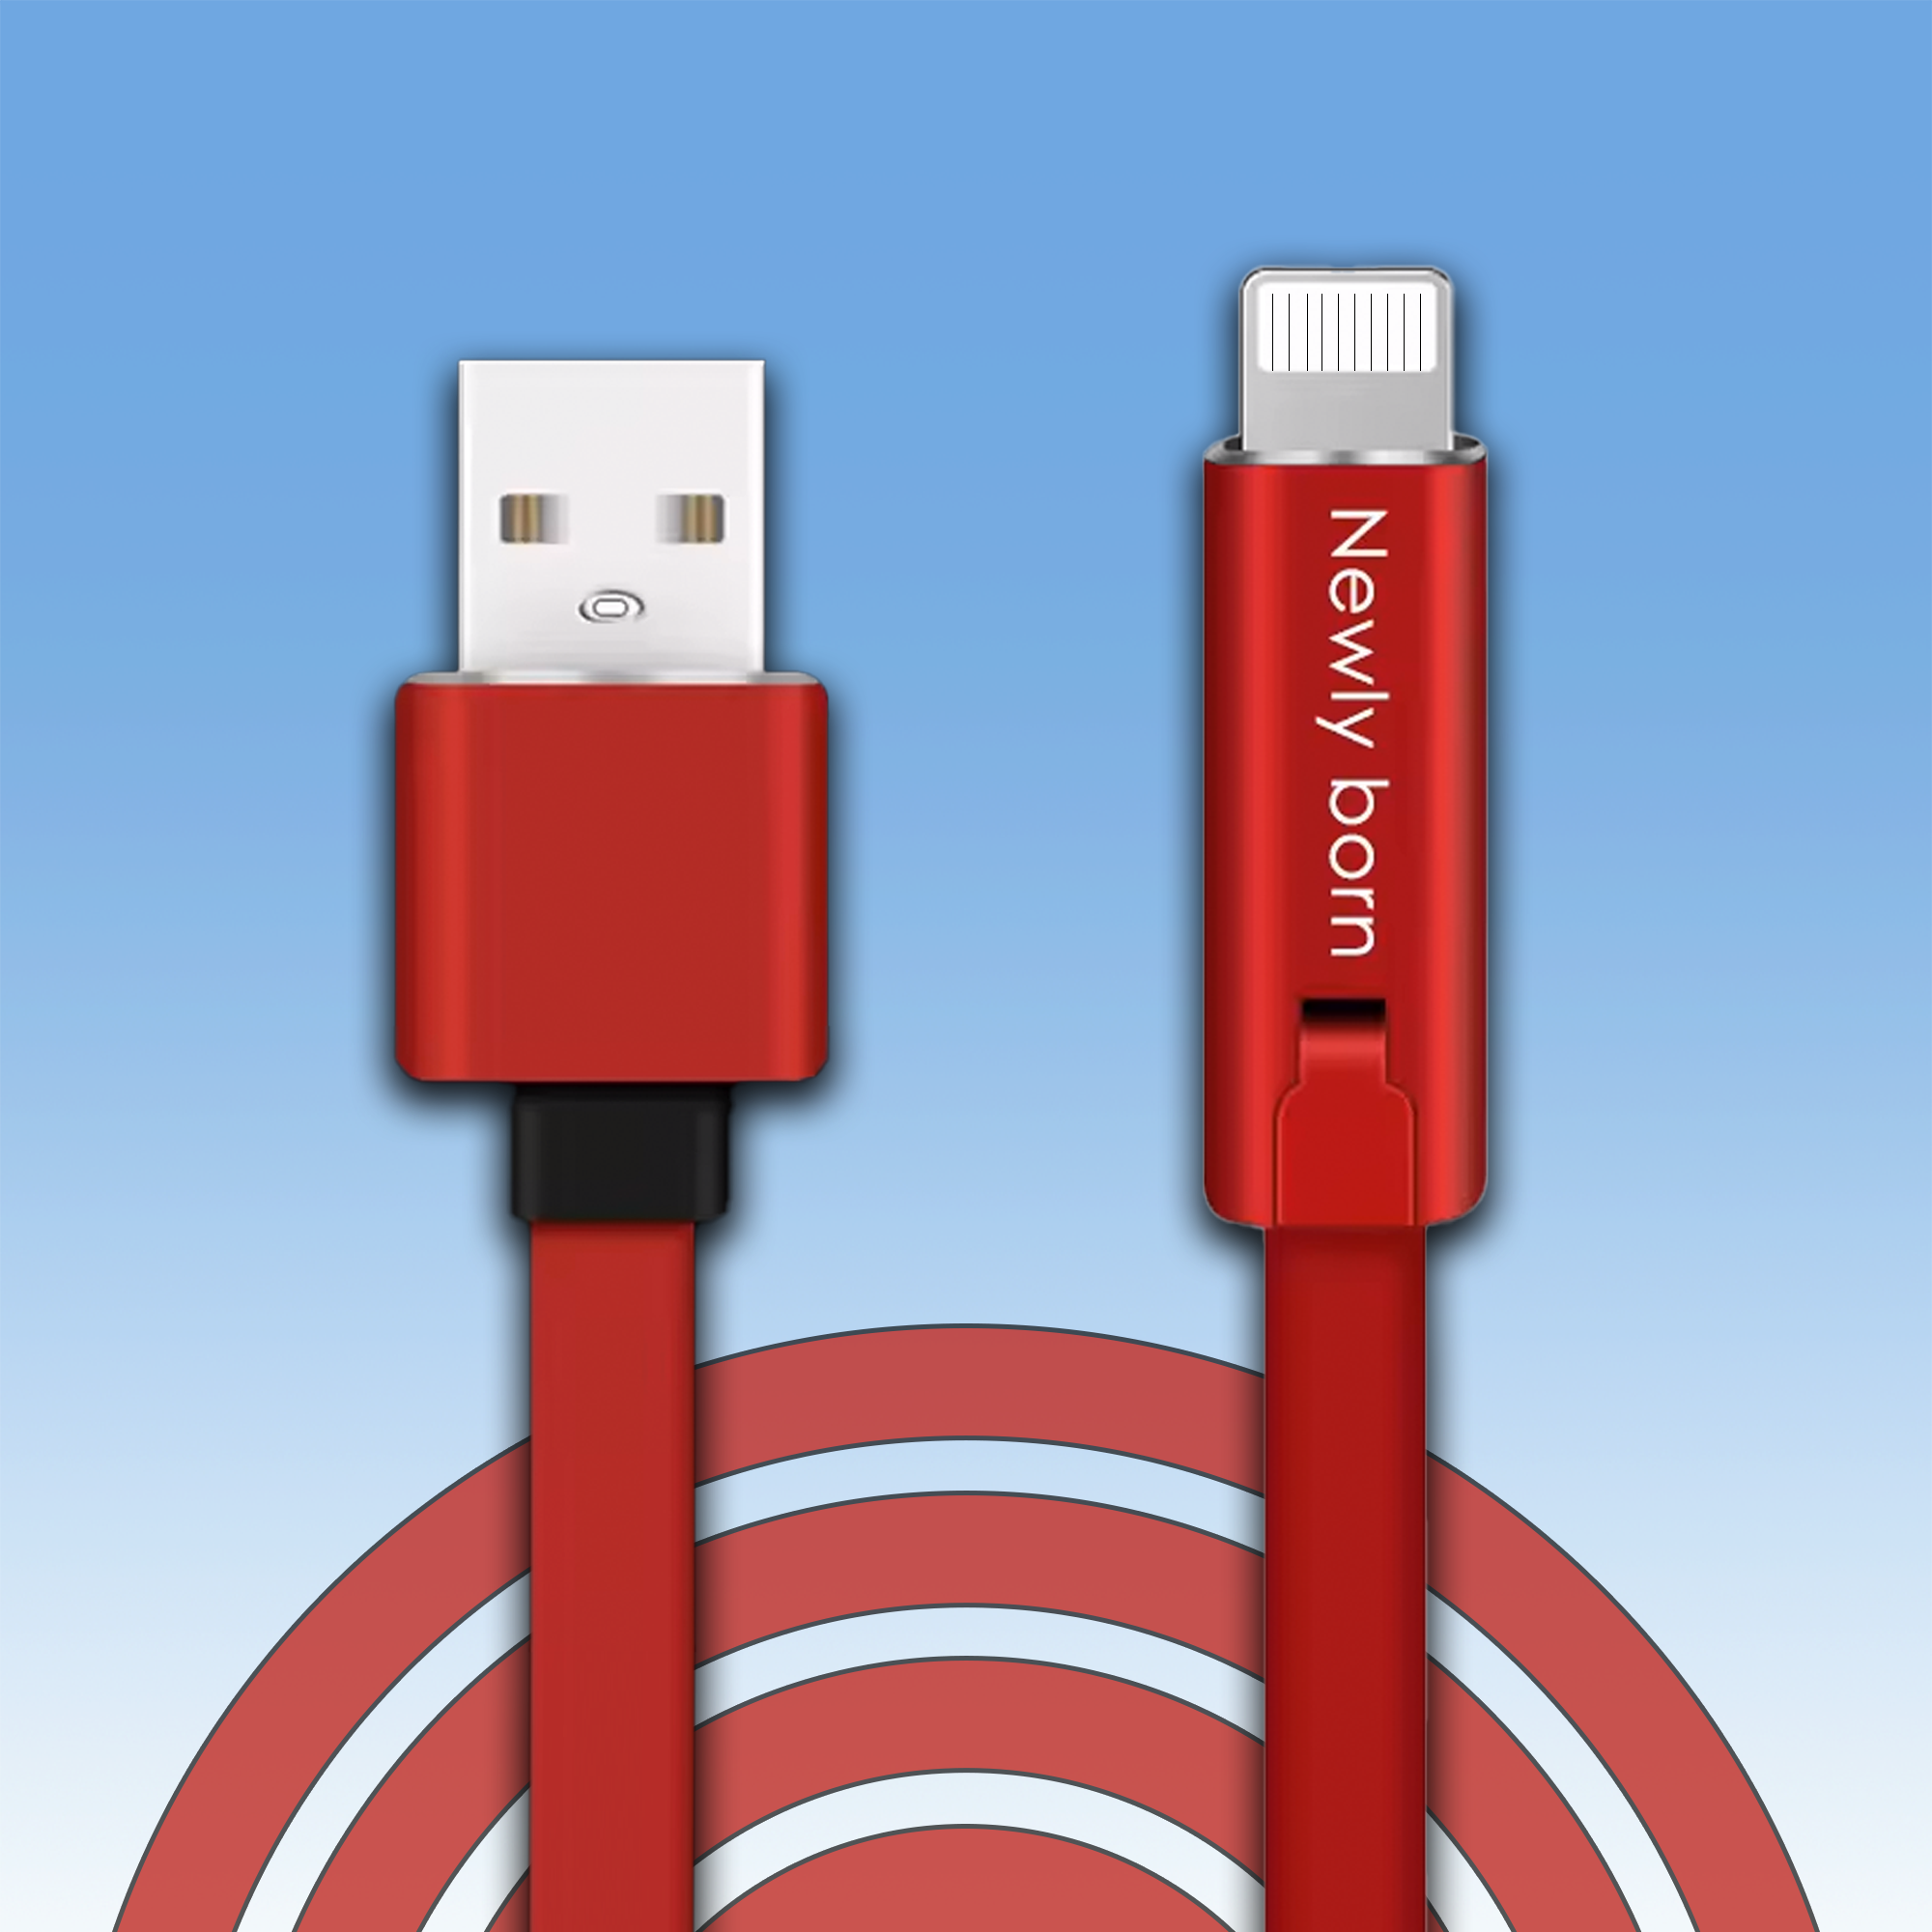 EZConnect Data Cable